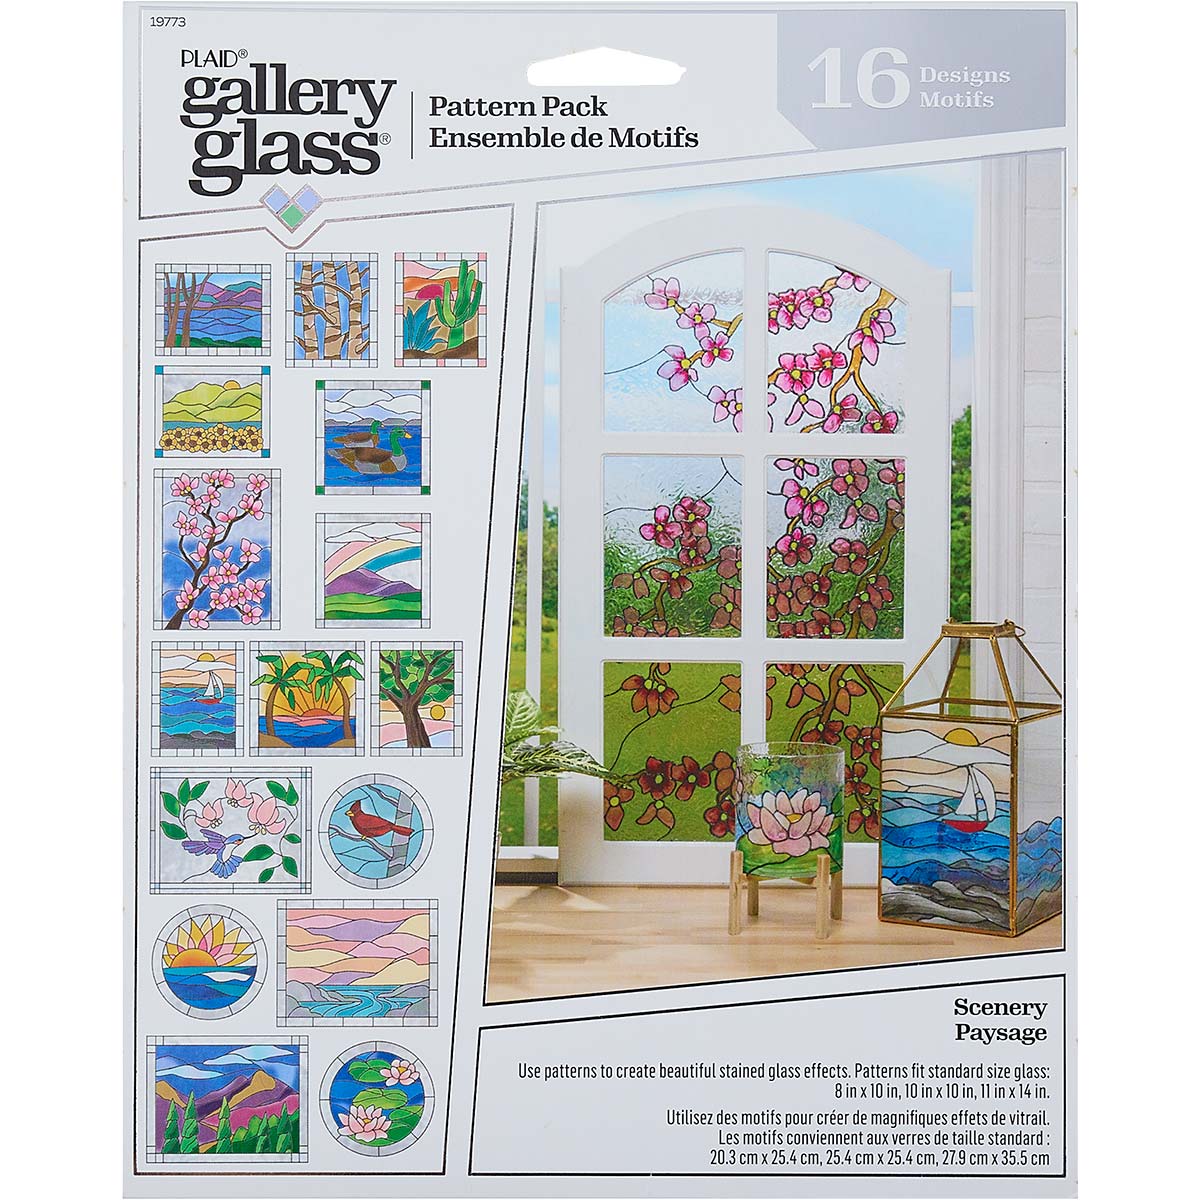 Gallery Glass - Plaid's 2022 New Product Showcase Session 7 